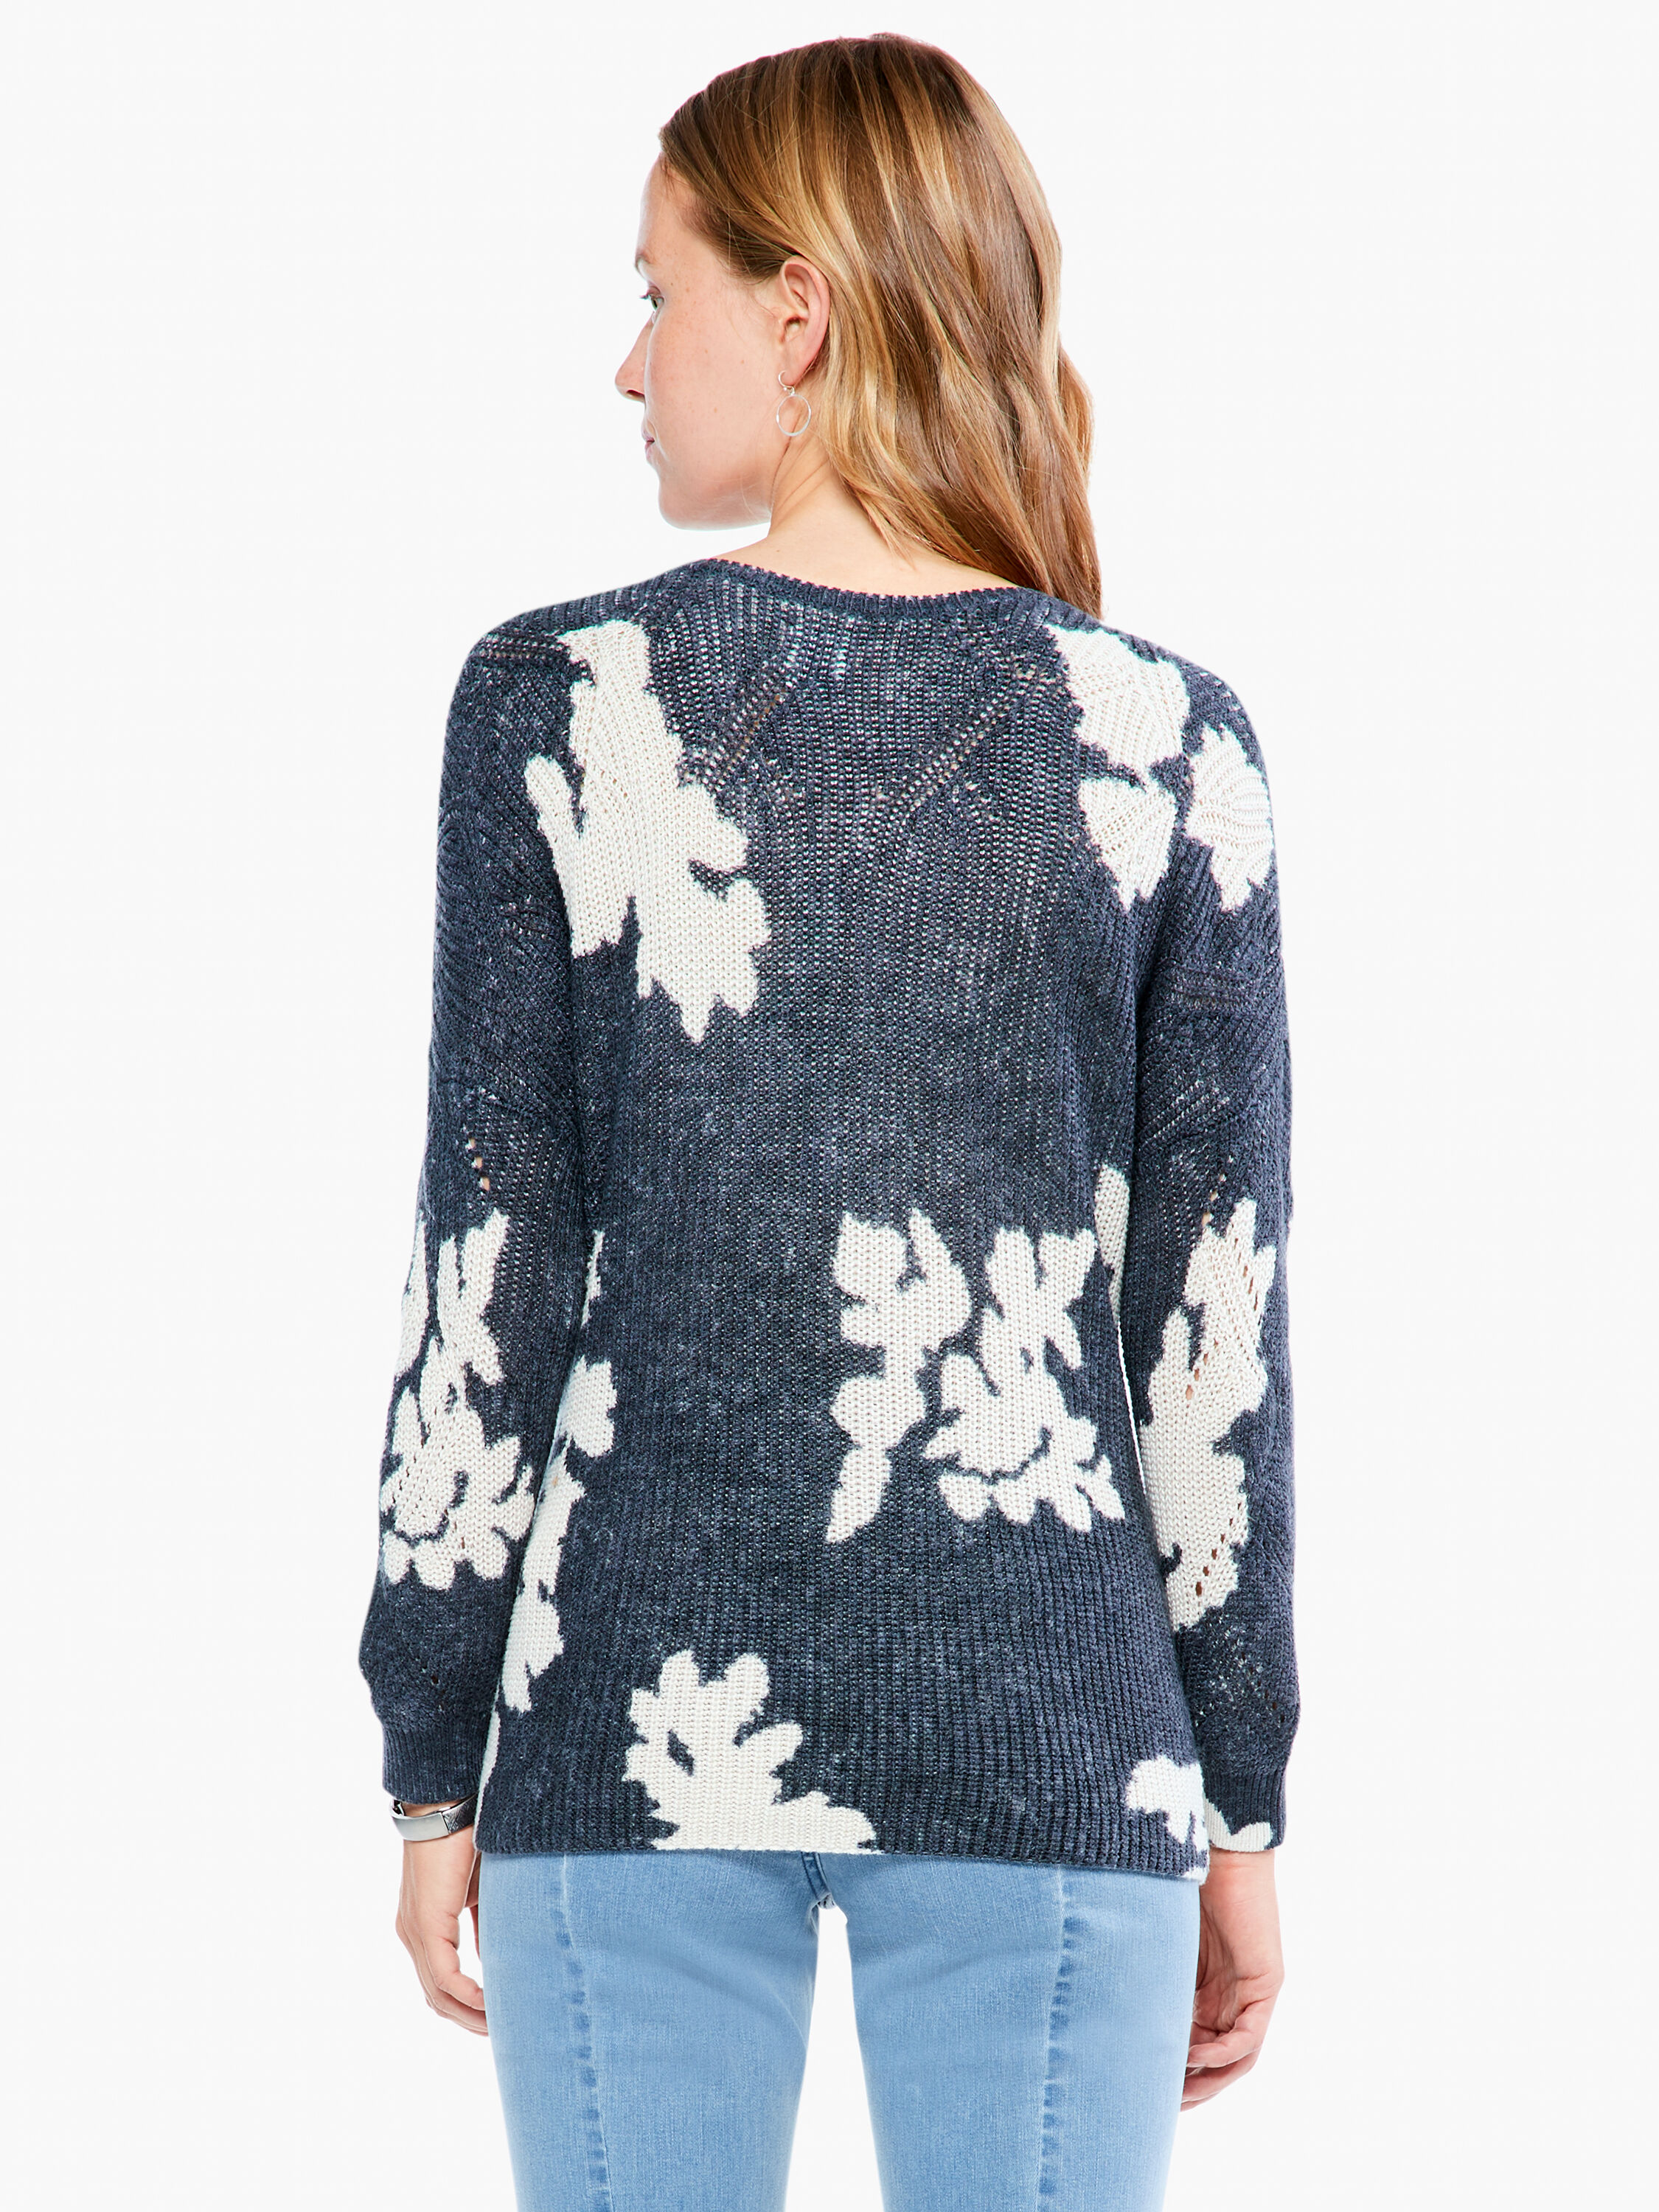 Scattered Florals Sweater | NIC+ZOE